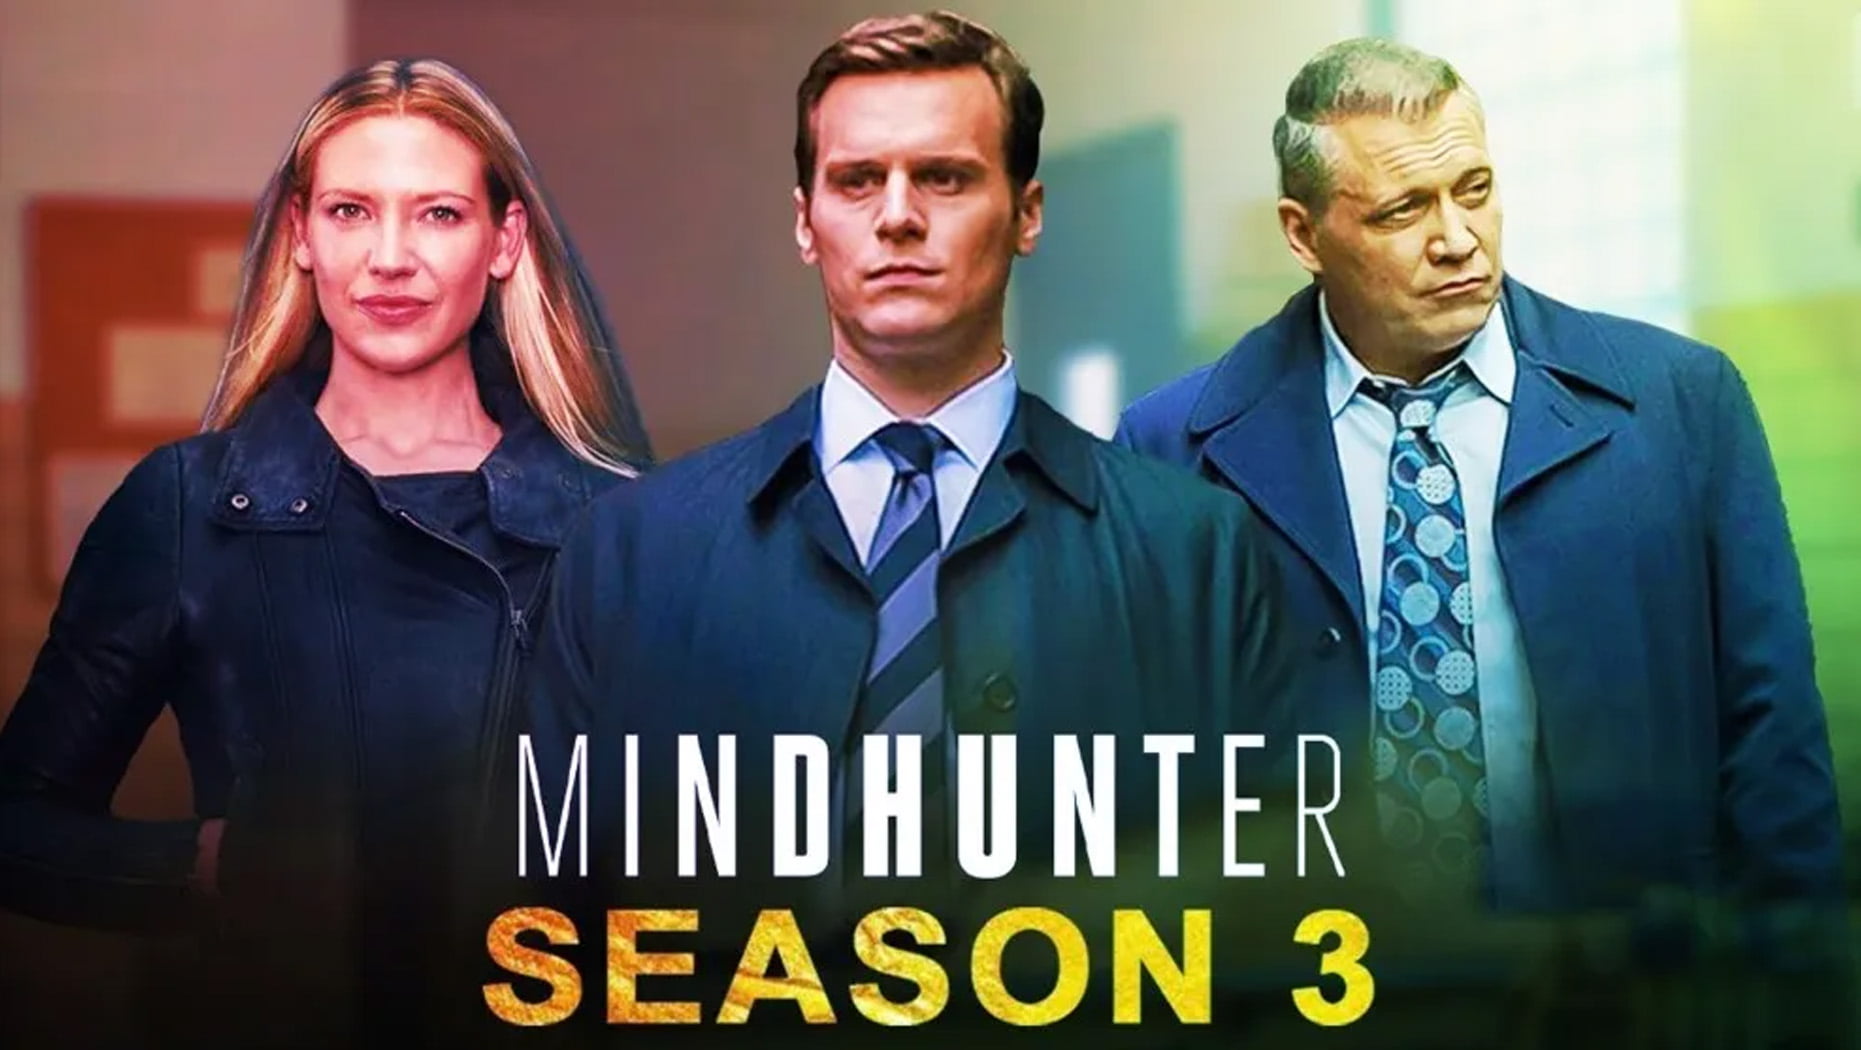 Mindhunter Season 3 All Information Related To The Third Season